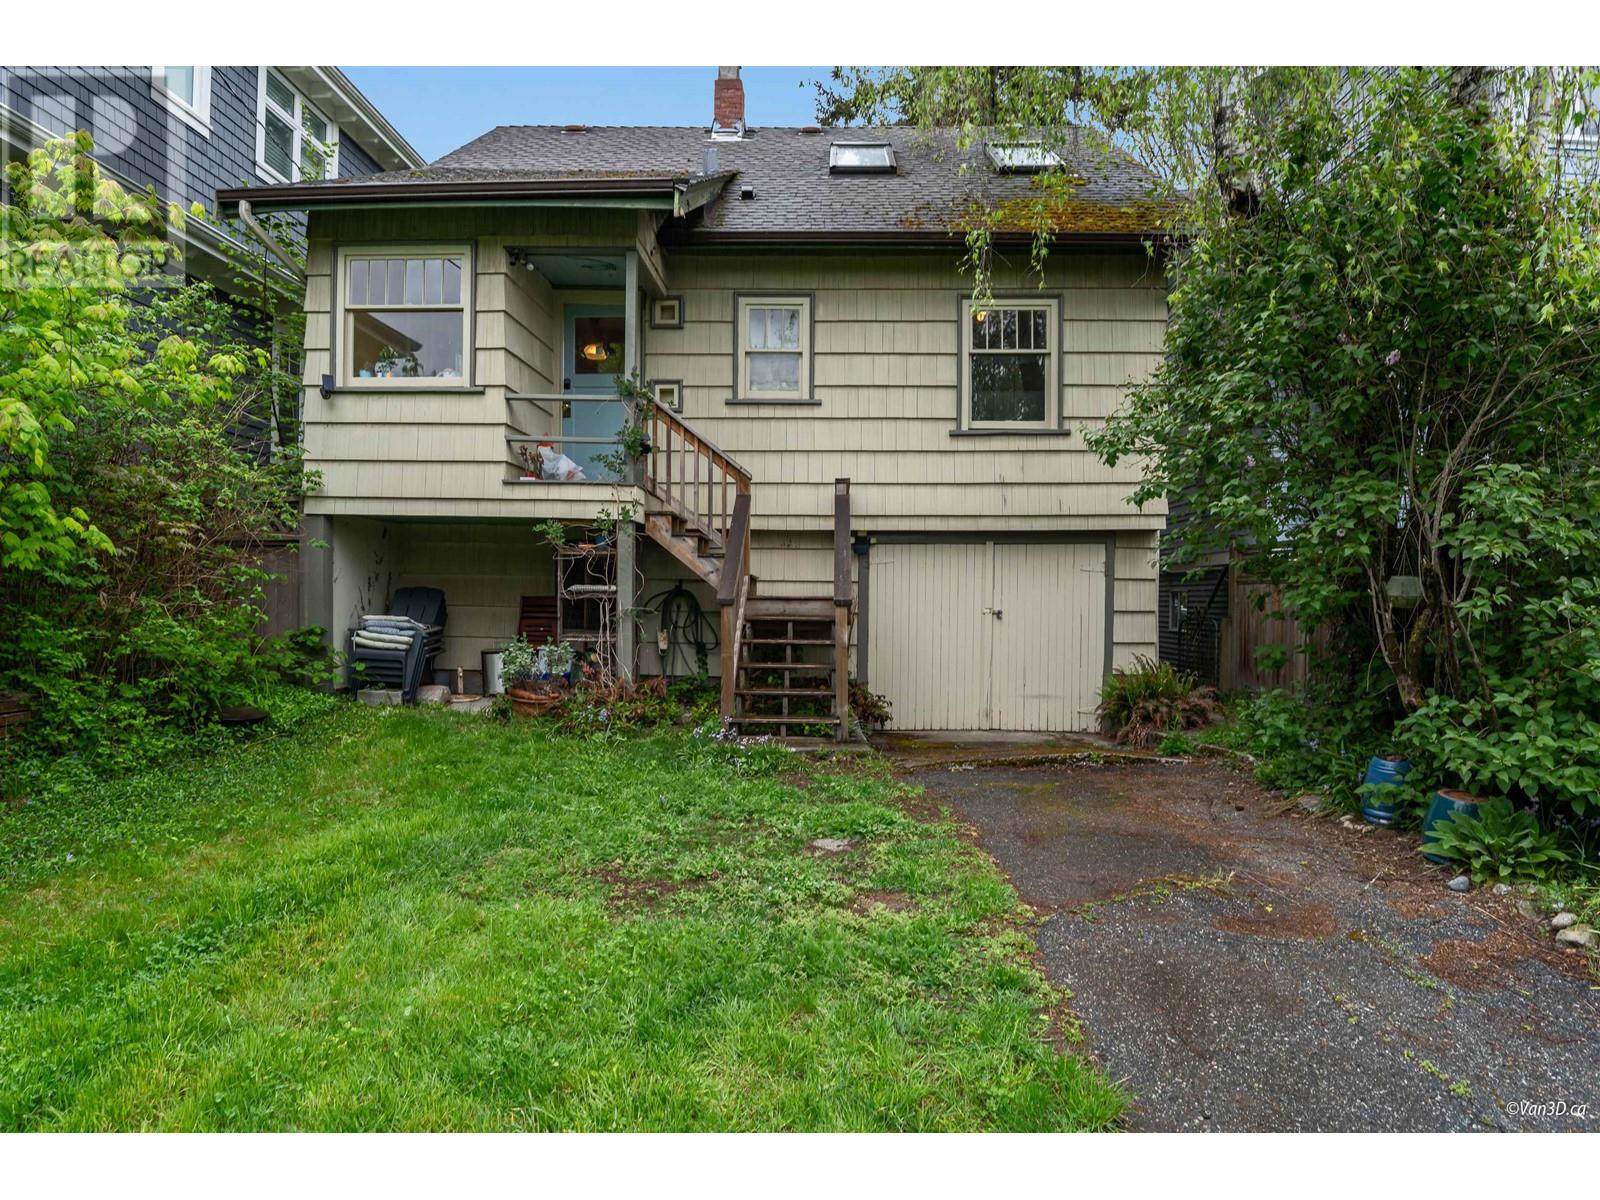 Listing Picture 25 of 31 : 3760 W 37TH AVENUE, Vancouver / 溫哥華 - 魯藝地產 Yvonne Lu Group - MLS Medallion Club Member